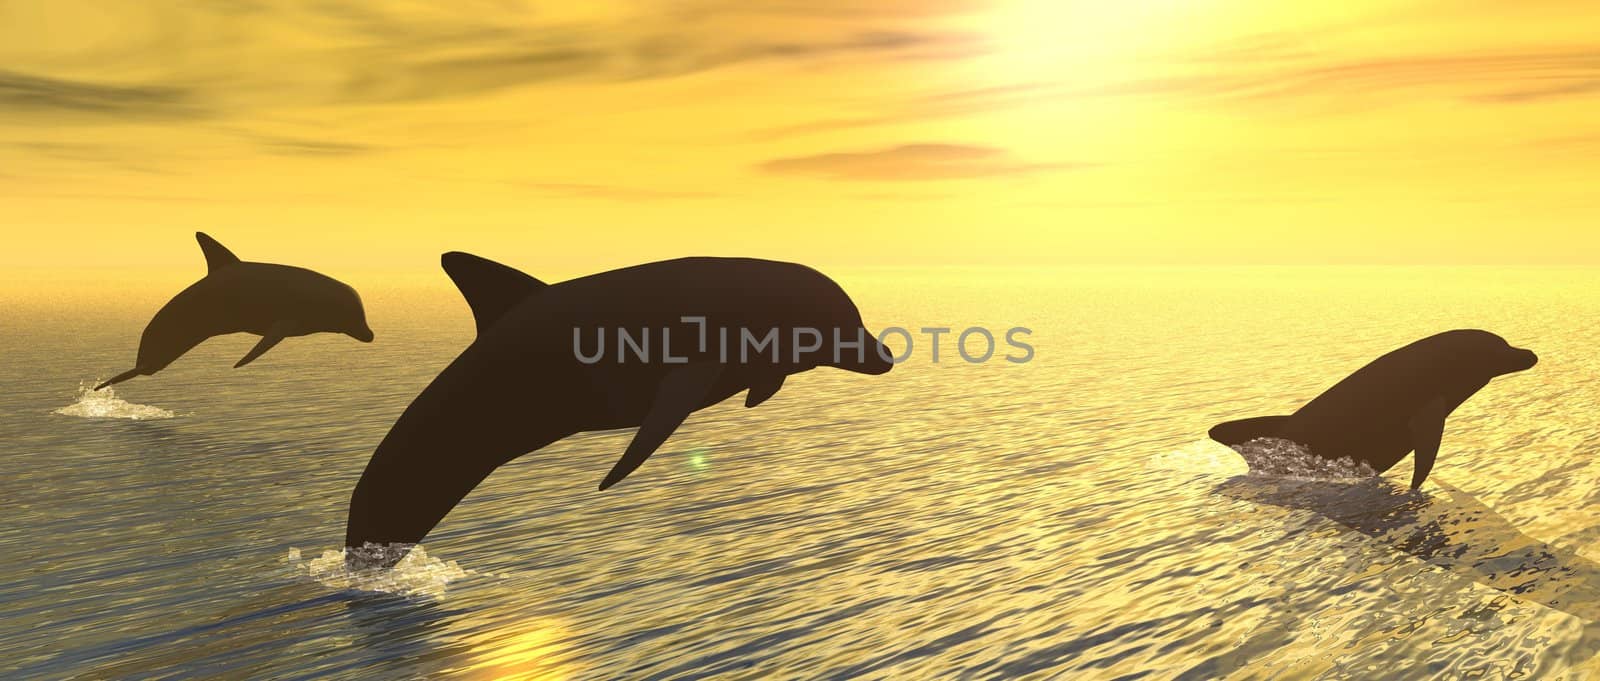 Dolphins at Sunset by jbouzou